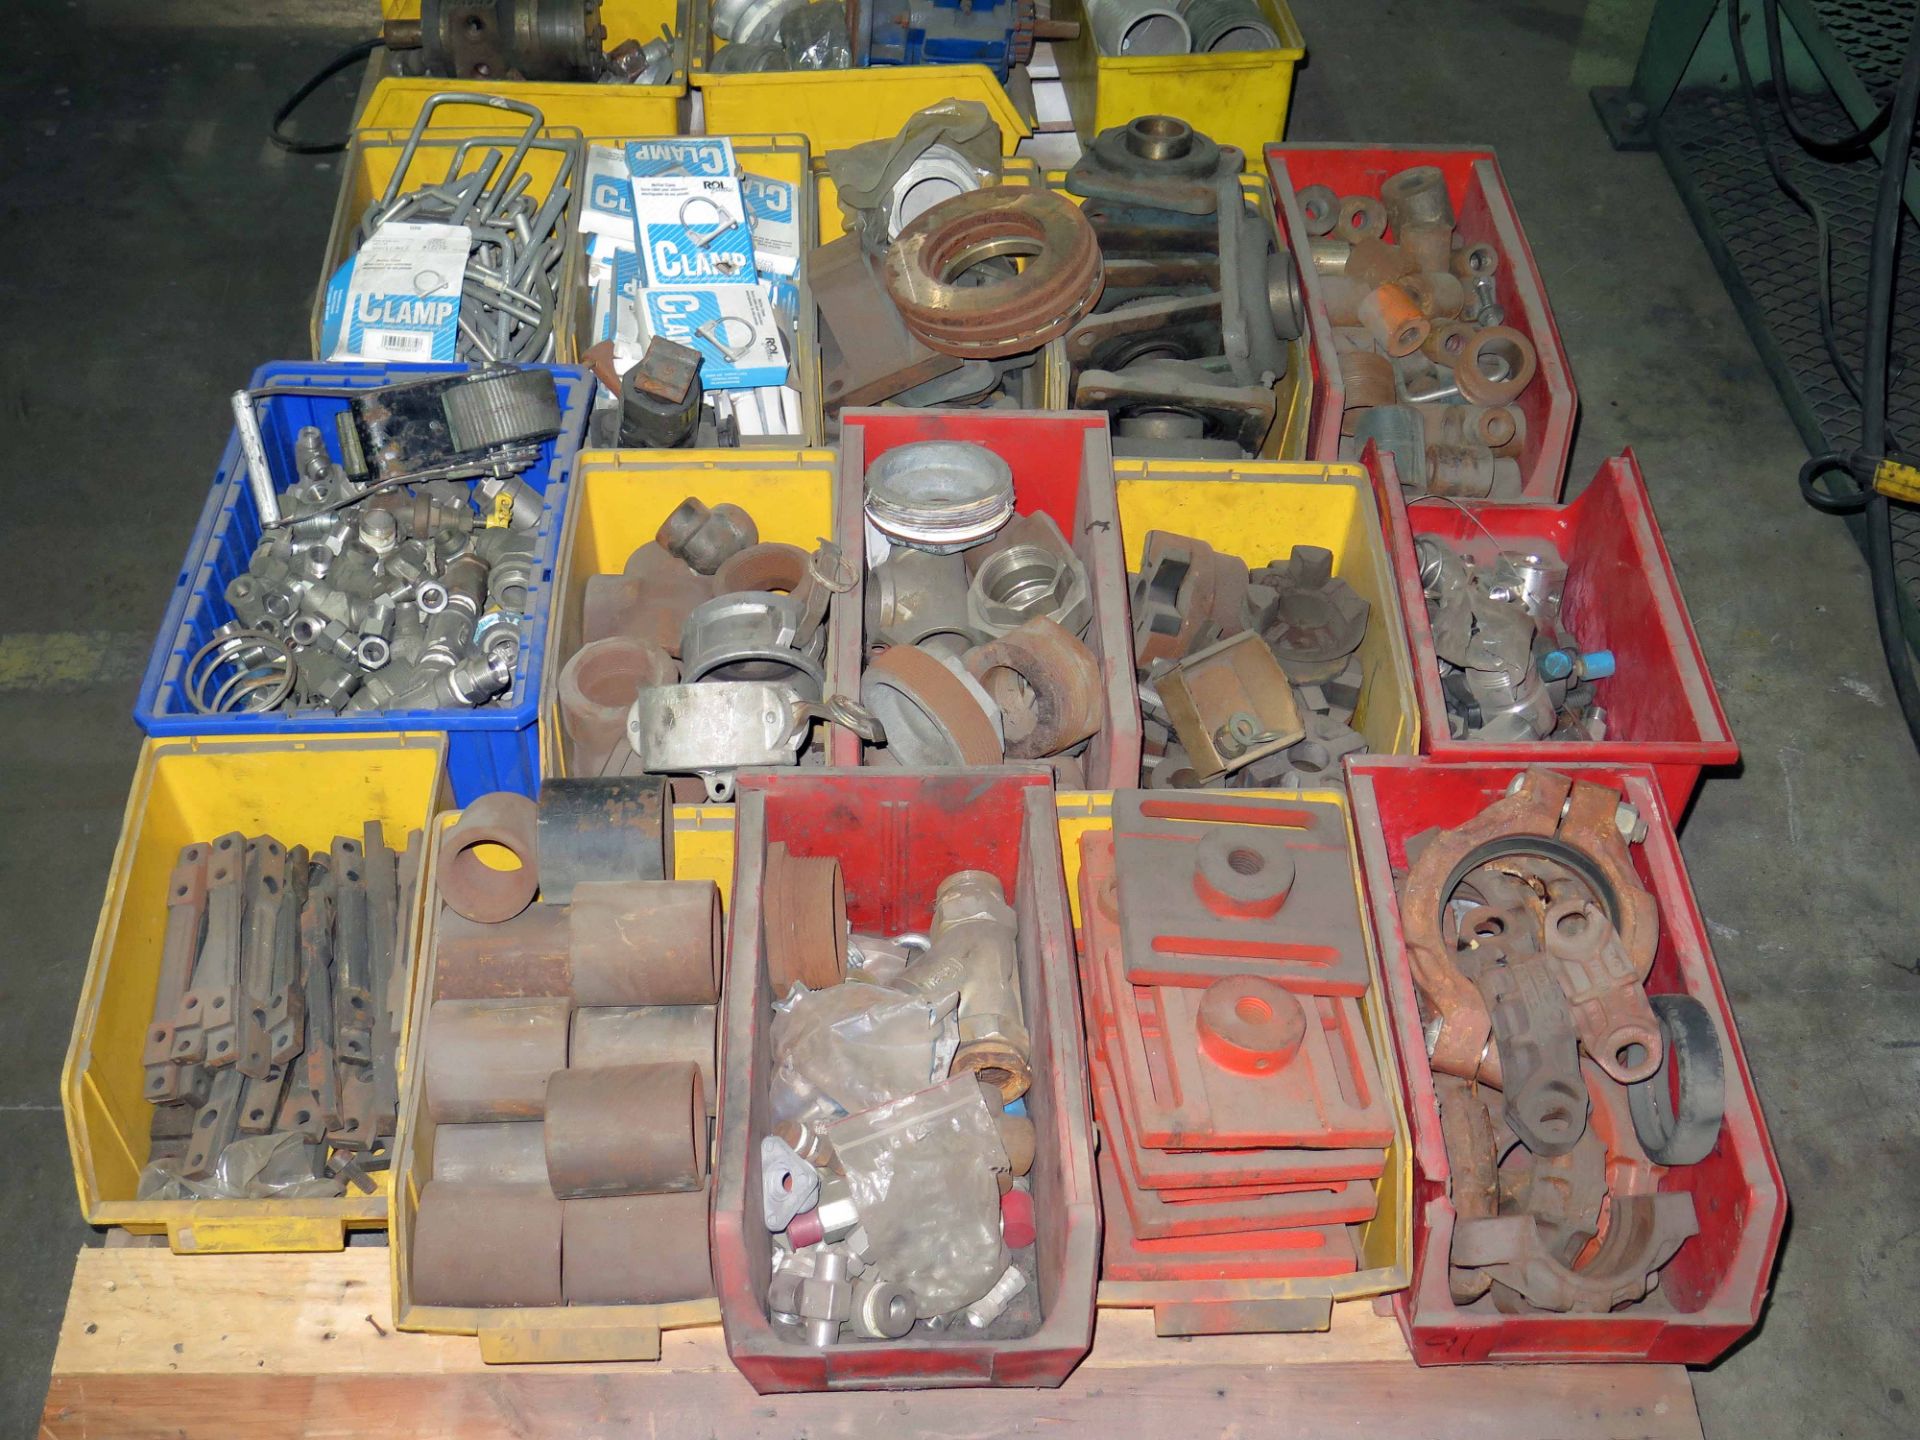 LOT CONSISTING OF: pipe fittings, clamps, U-bolts, pump fixtures (on three pallets)